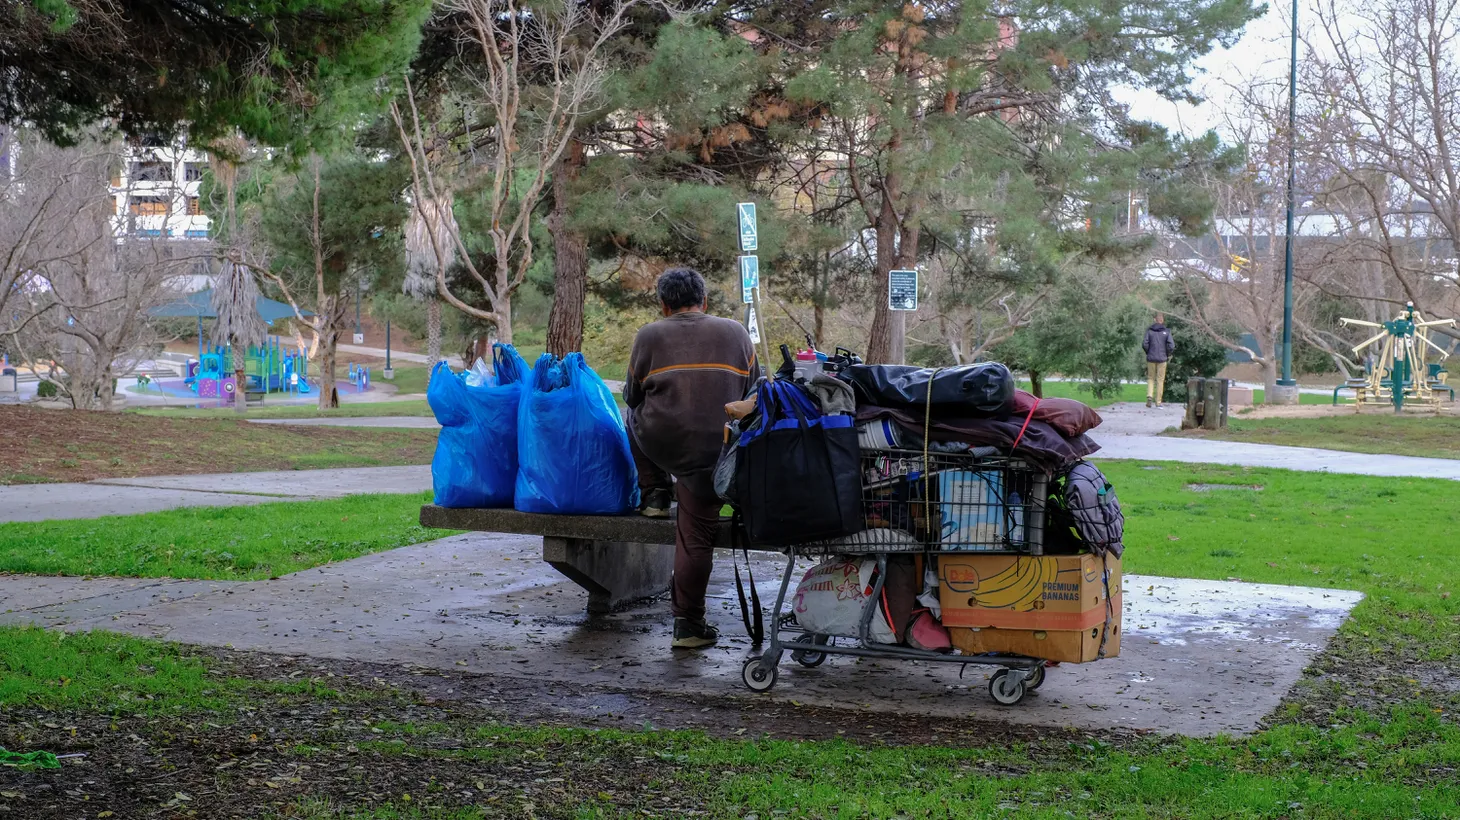 An unhoused person stands with their belongings at a table in Pan Pacific Park in the Fairfax neighborhood of Los Angeles, CA.